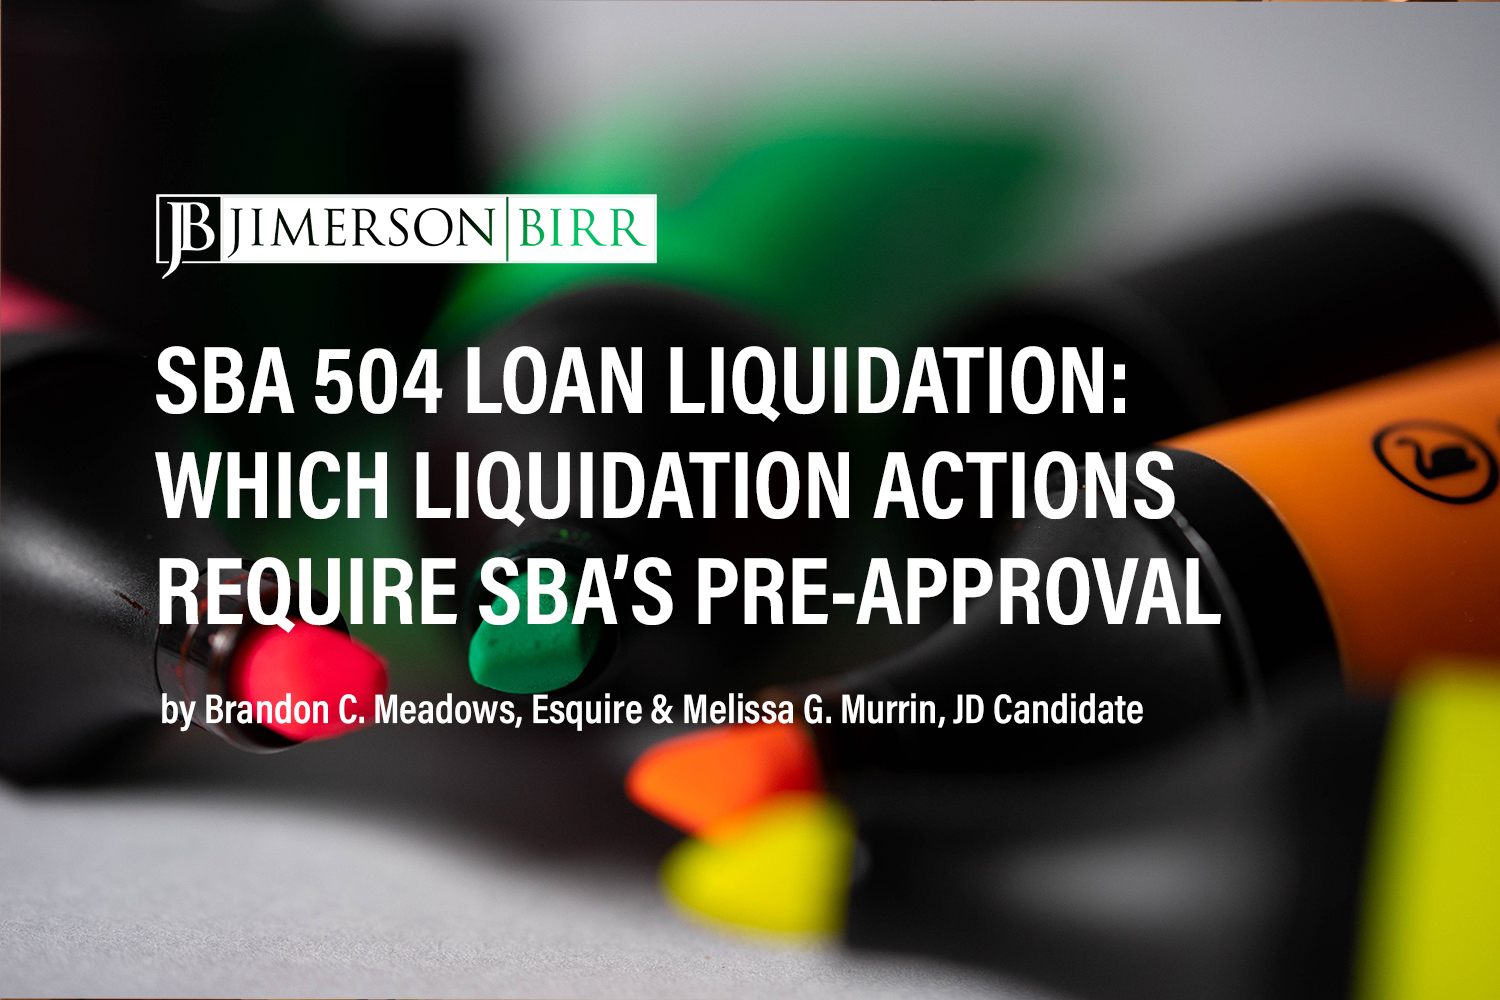 SBA 504 Loan Liquidation: Which Liquidation Actions Require SBA’s Pre-Approval (Part 2)